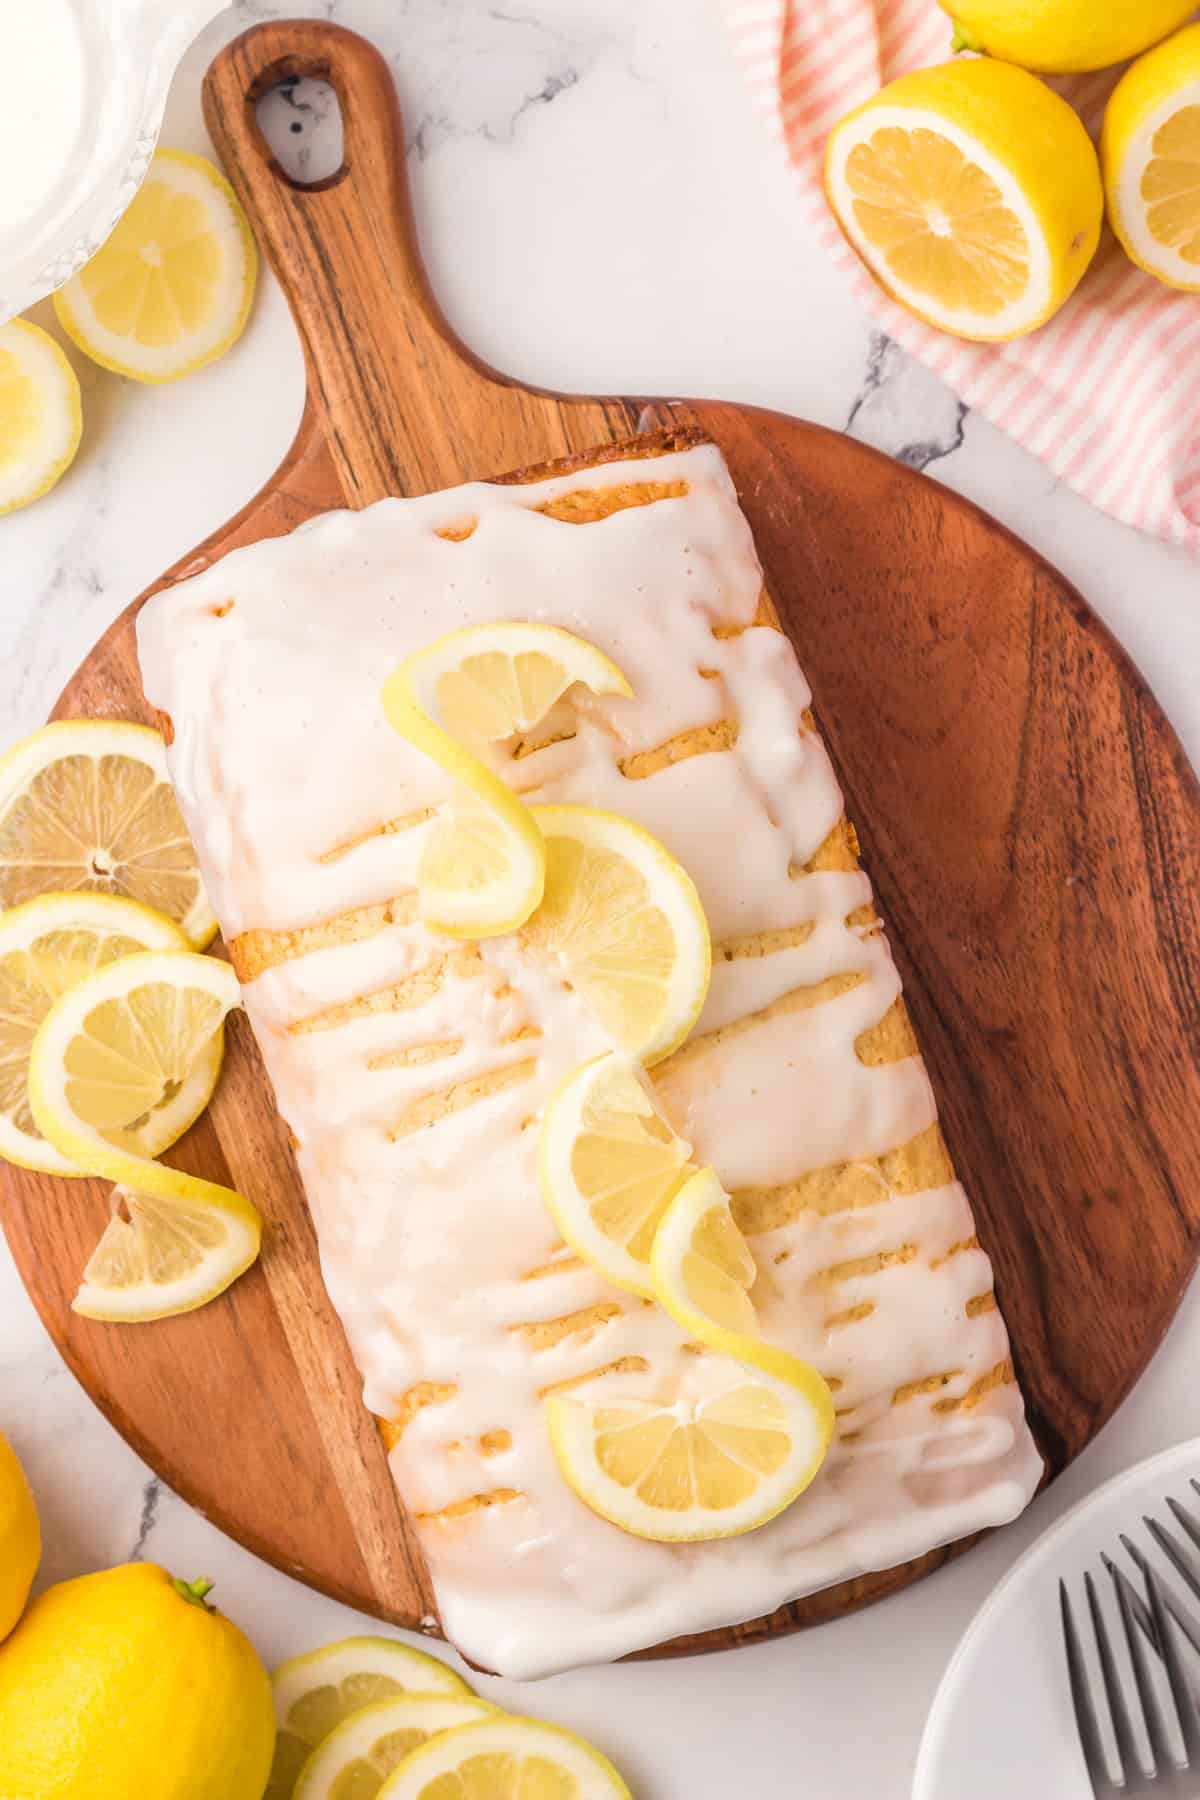 Vegan lemon loaf topped with glaze and lemon slices on a round wooden board.